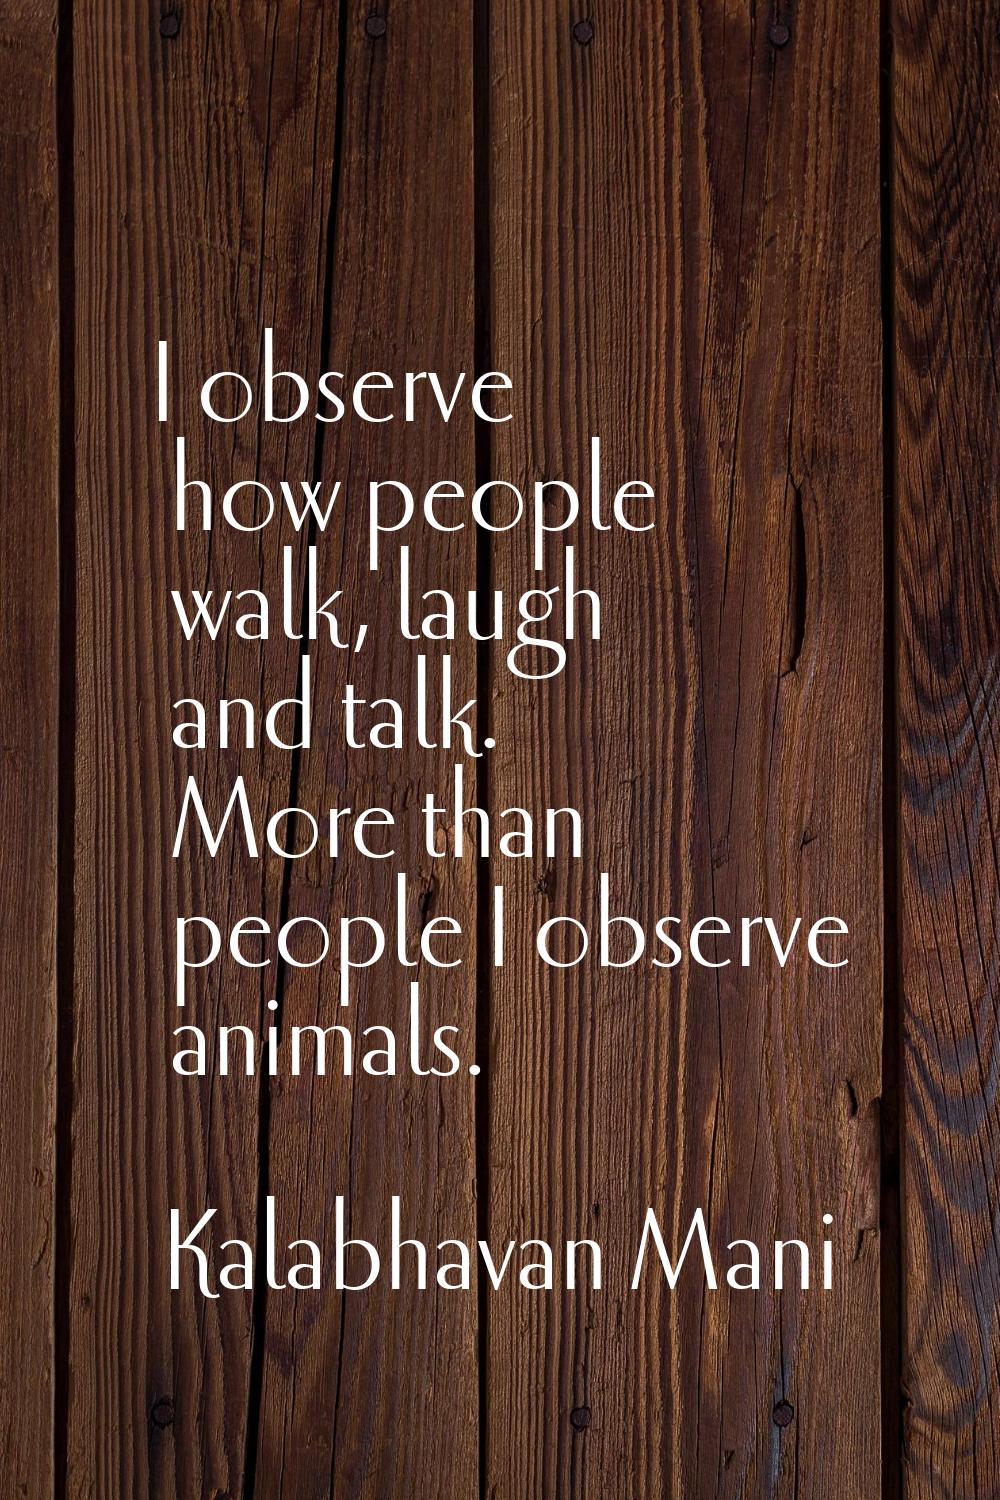 I observe how people walk, laugh and talk. More than people I observe animals.